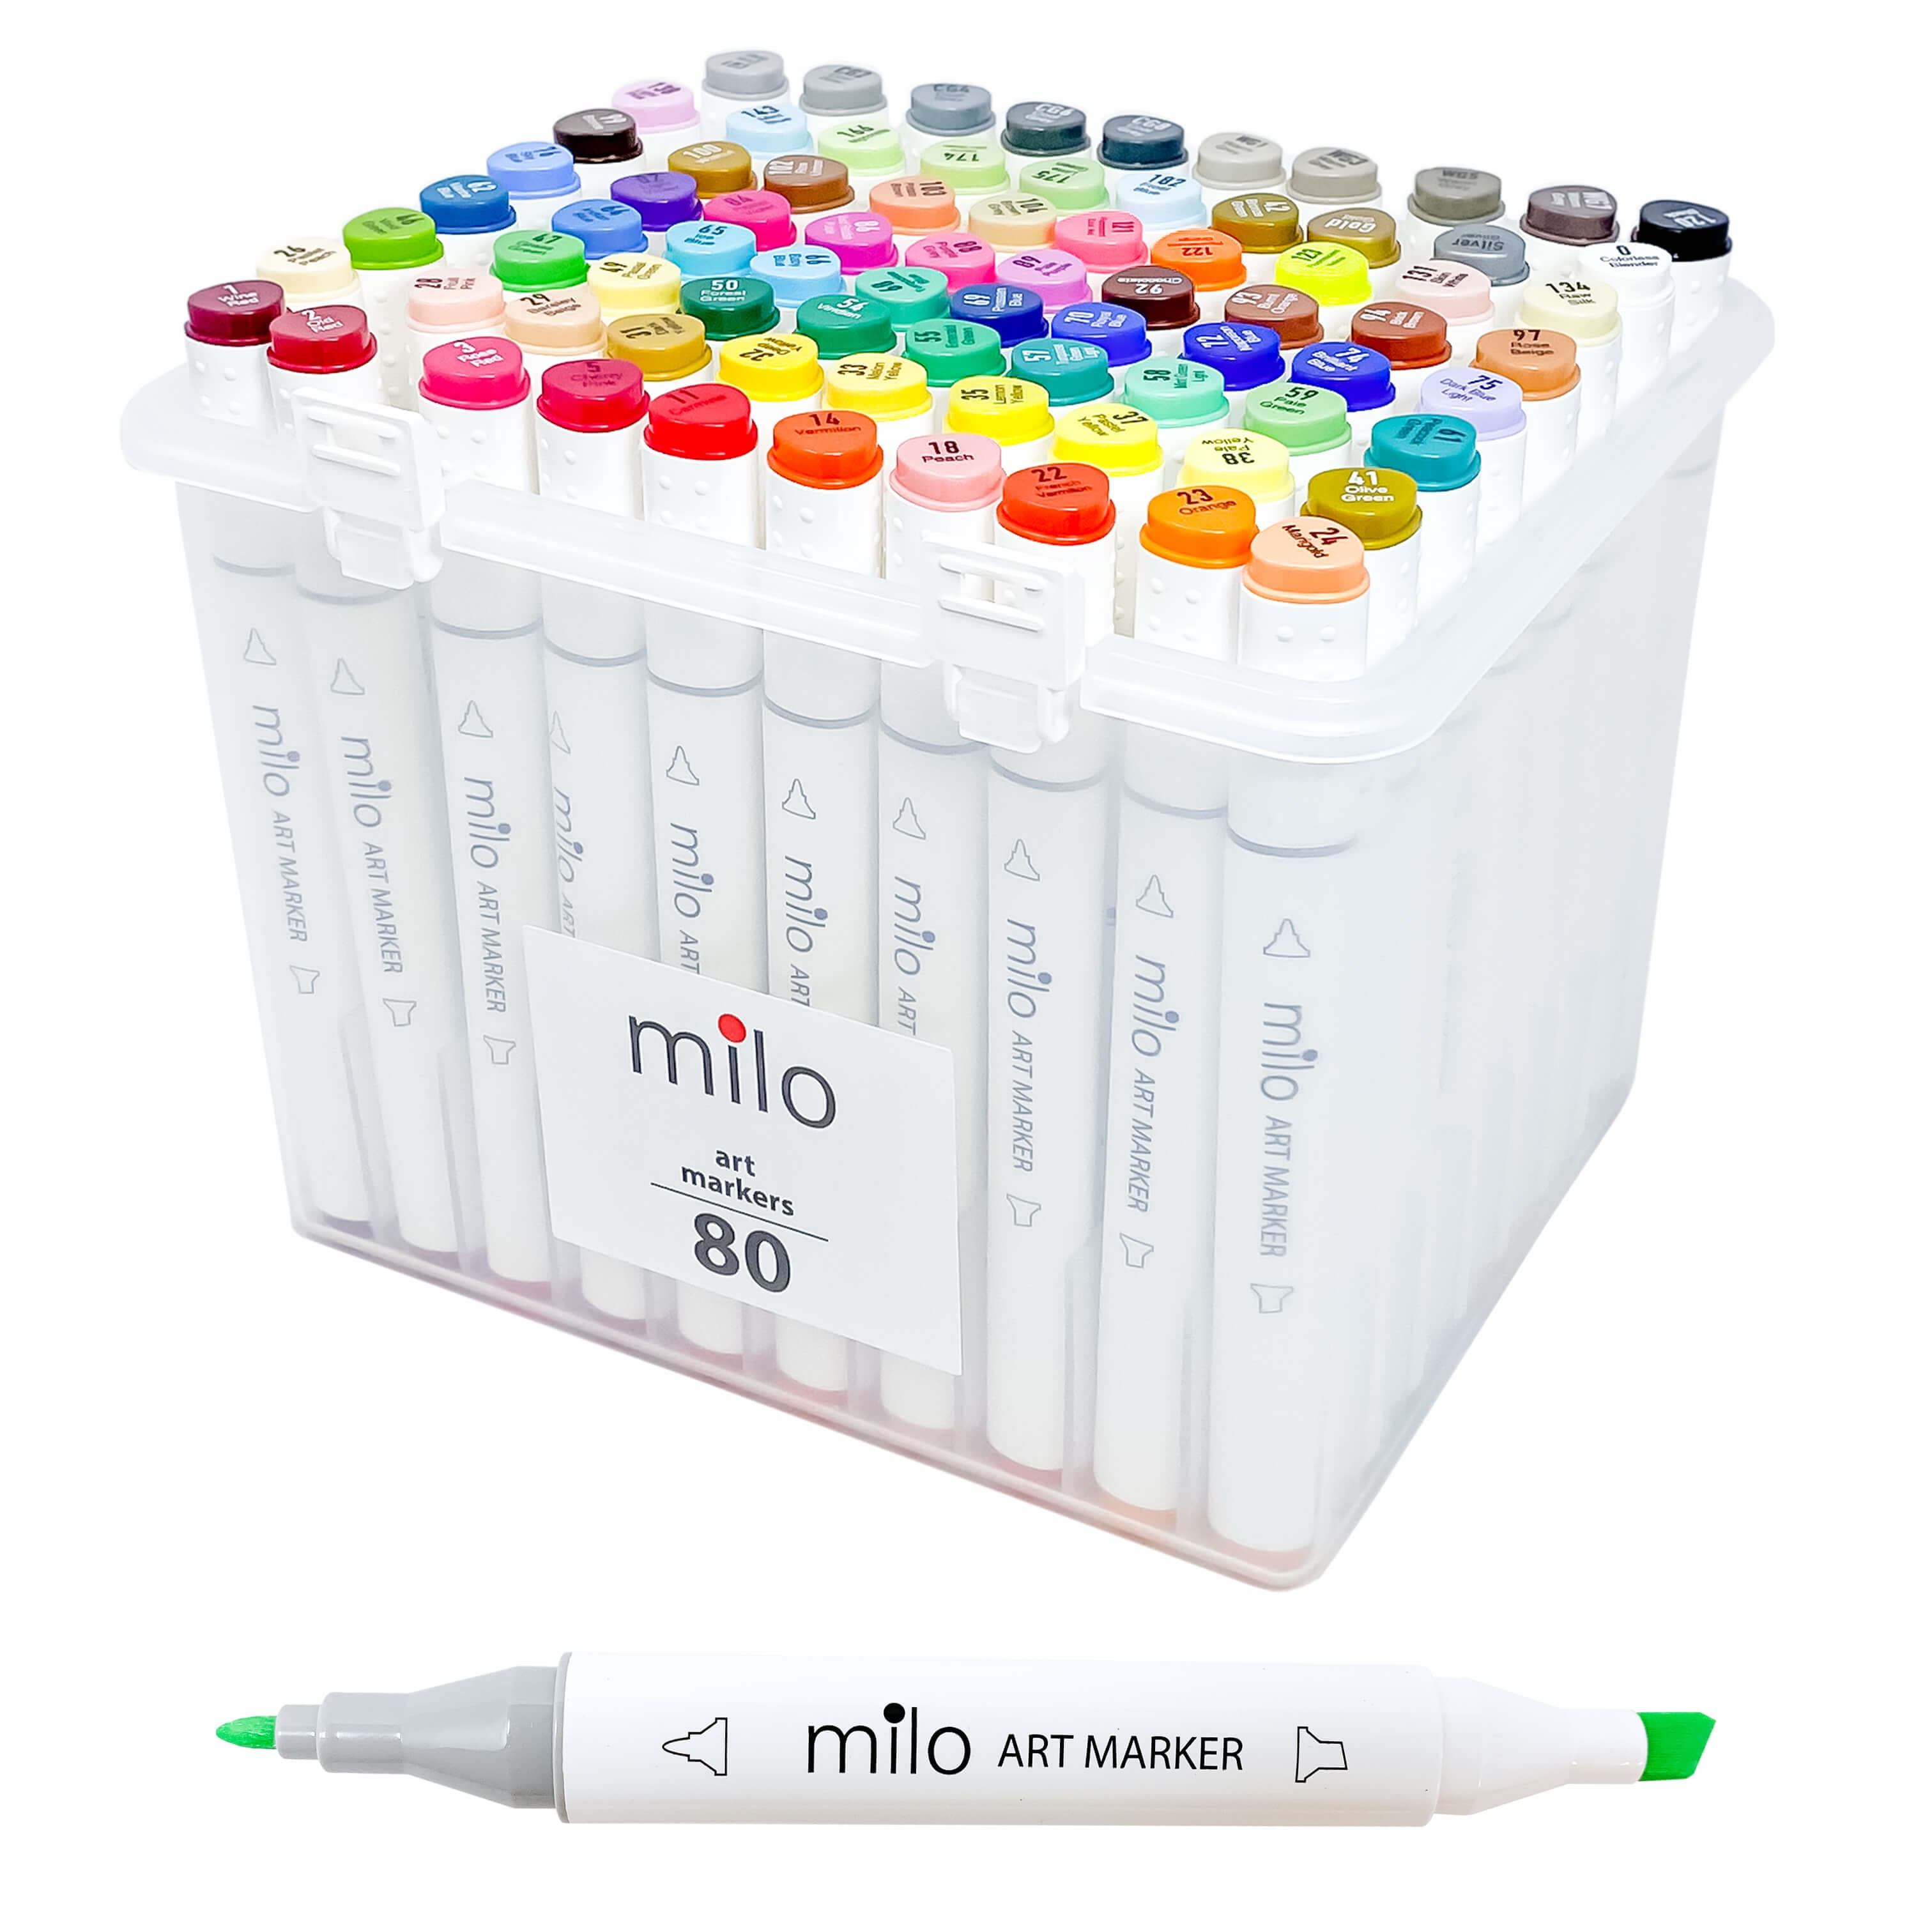 INCHOO 80 Colors Alcohol Based Art Marker Set Dual Tipped Twin Marker Pens  with Black Carrying Case